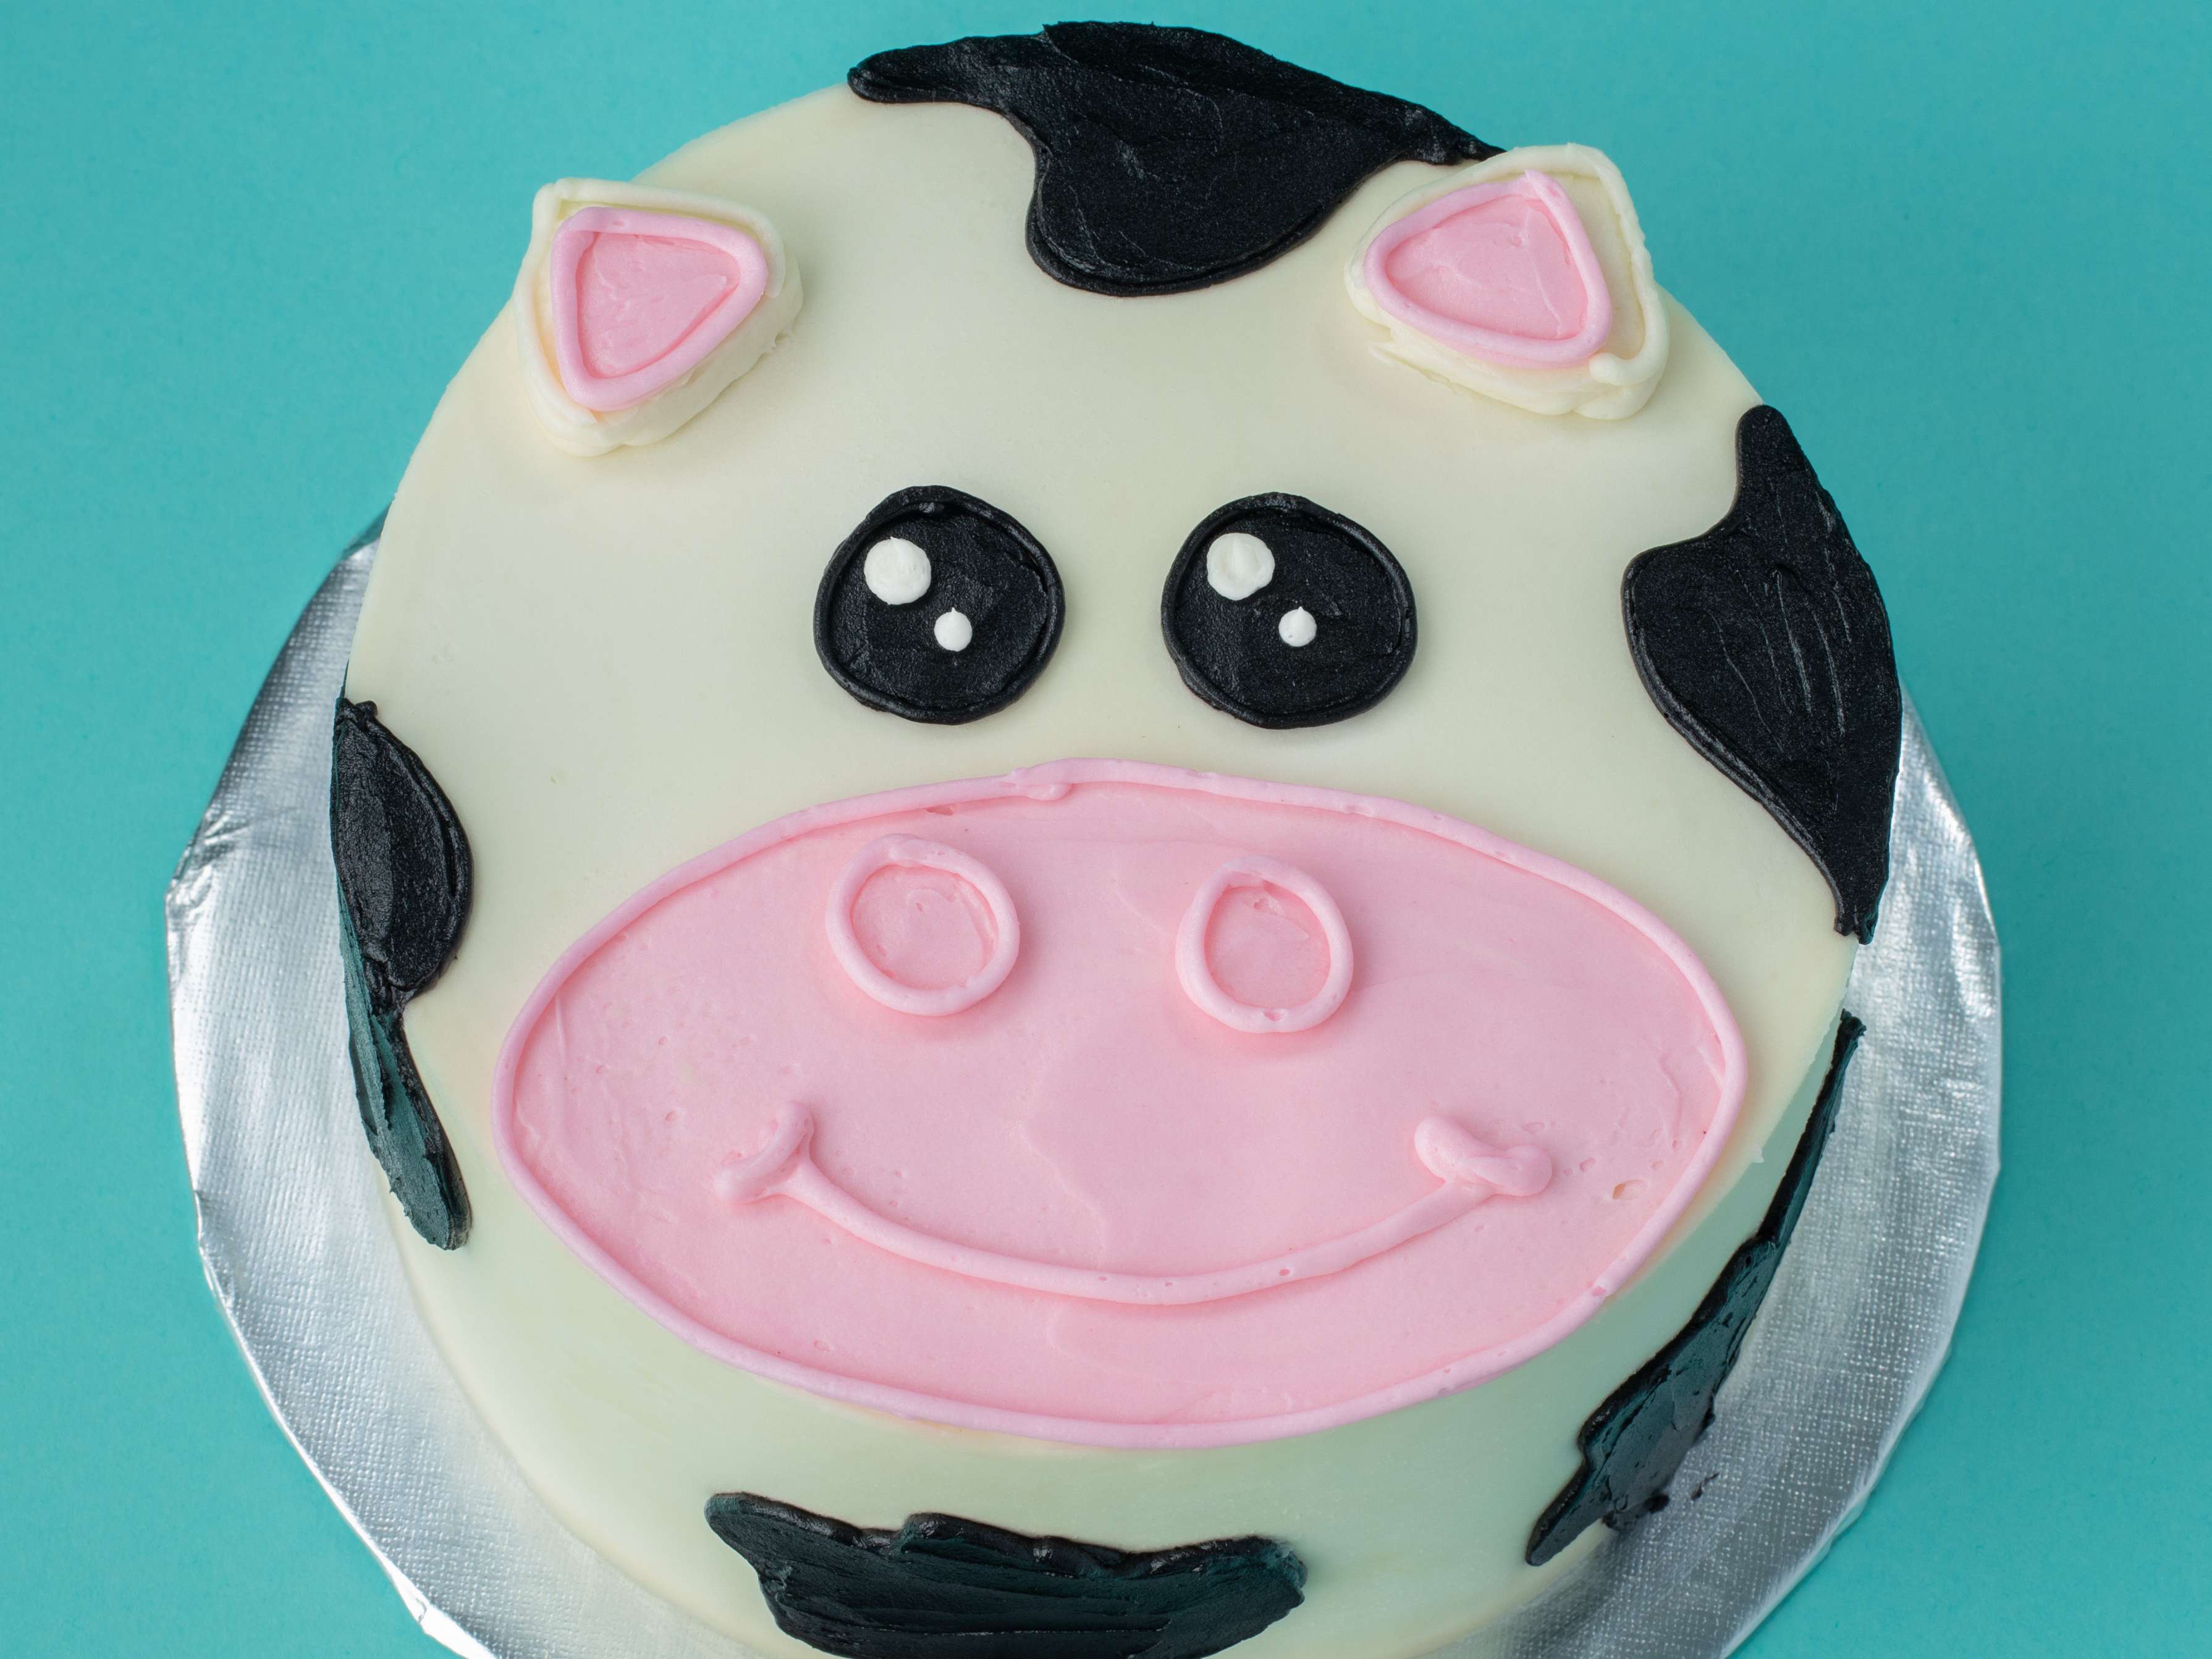 Cow Cake | Cow birthday parties, Cow cakes, Cow birthday